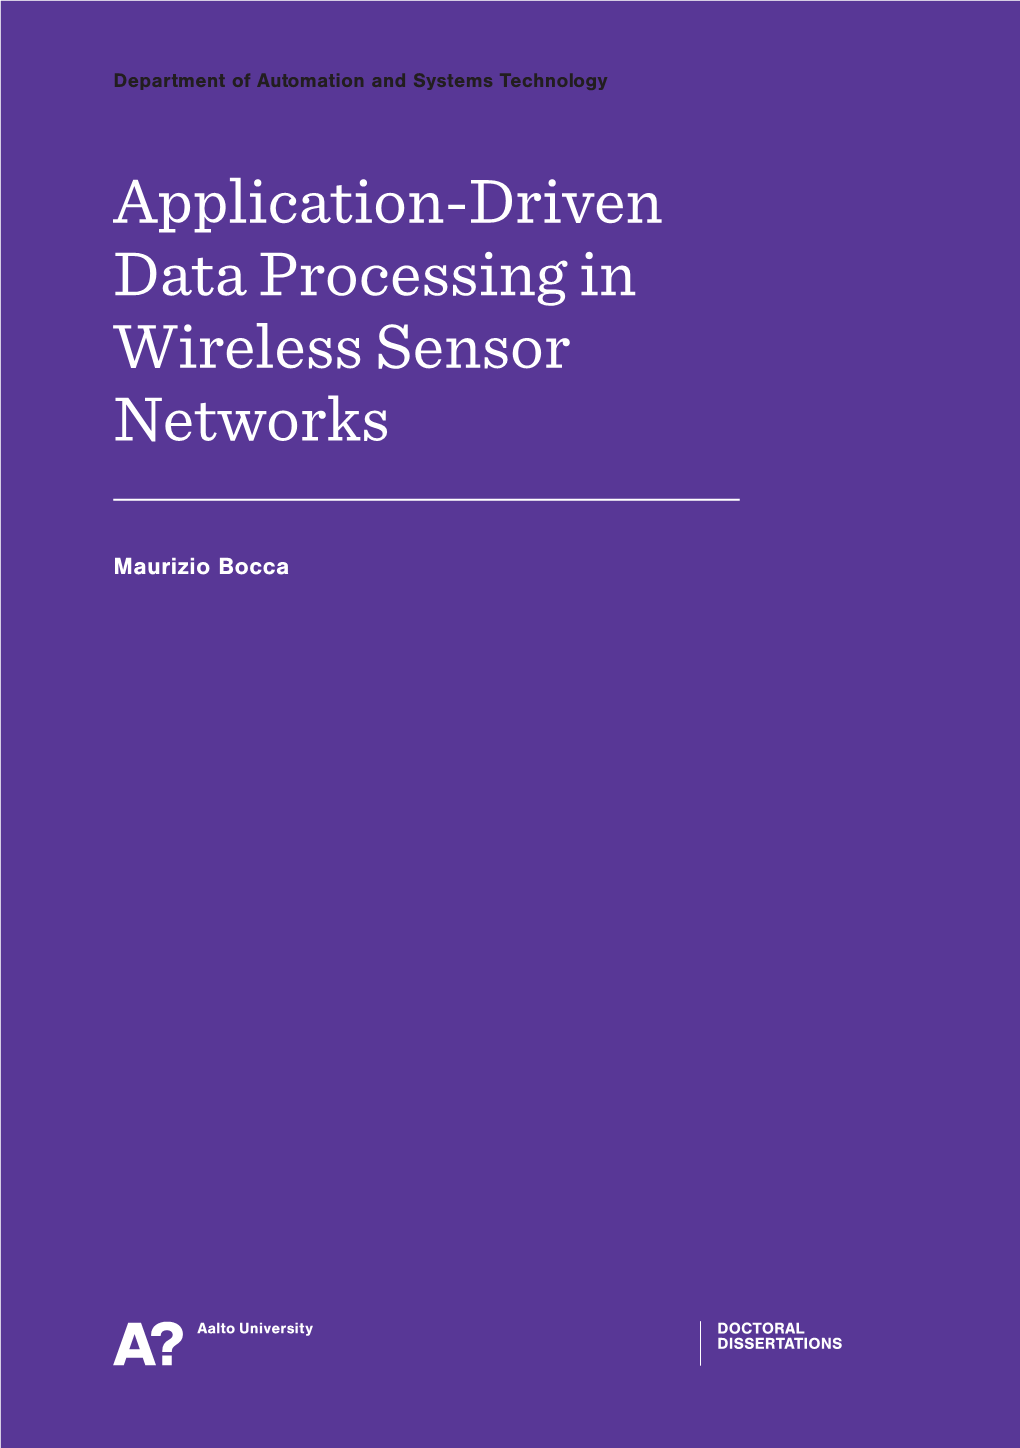 Appl Data Wire Netw Application-Driven Data Processing